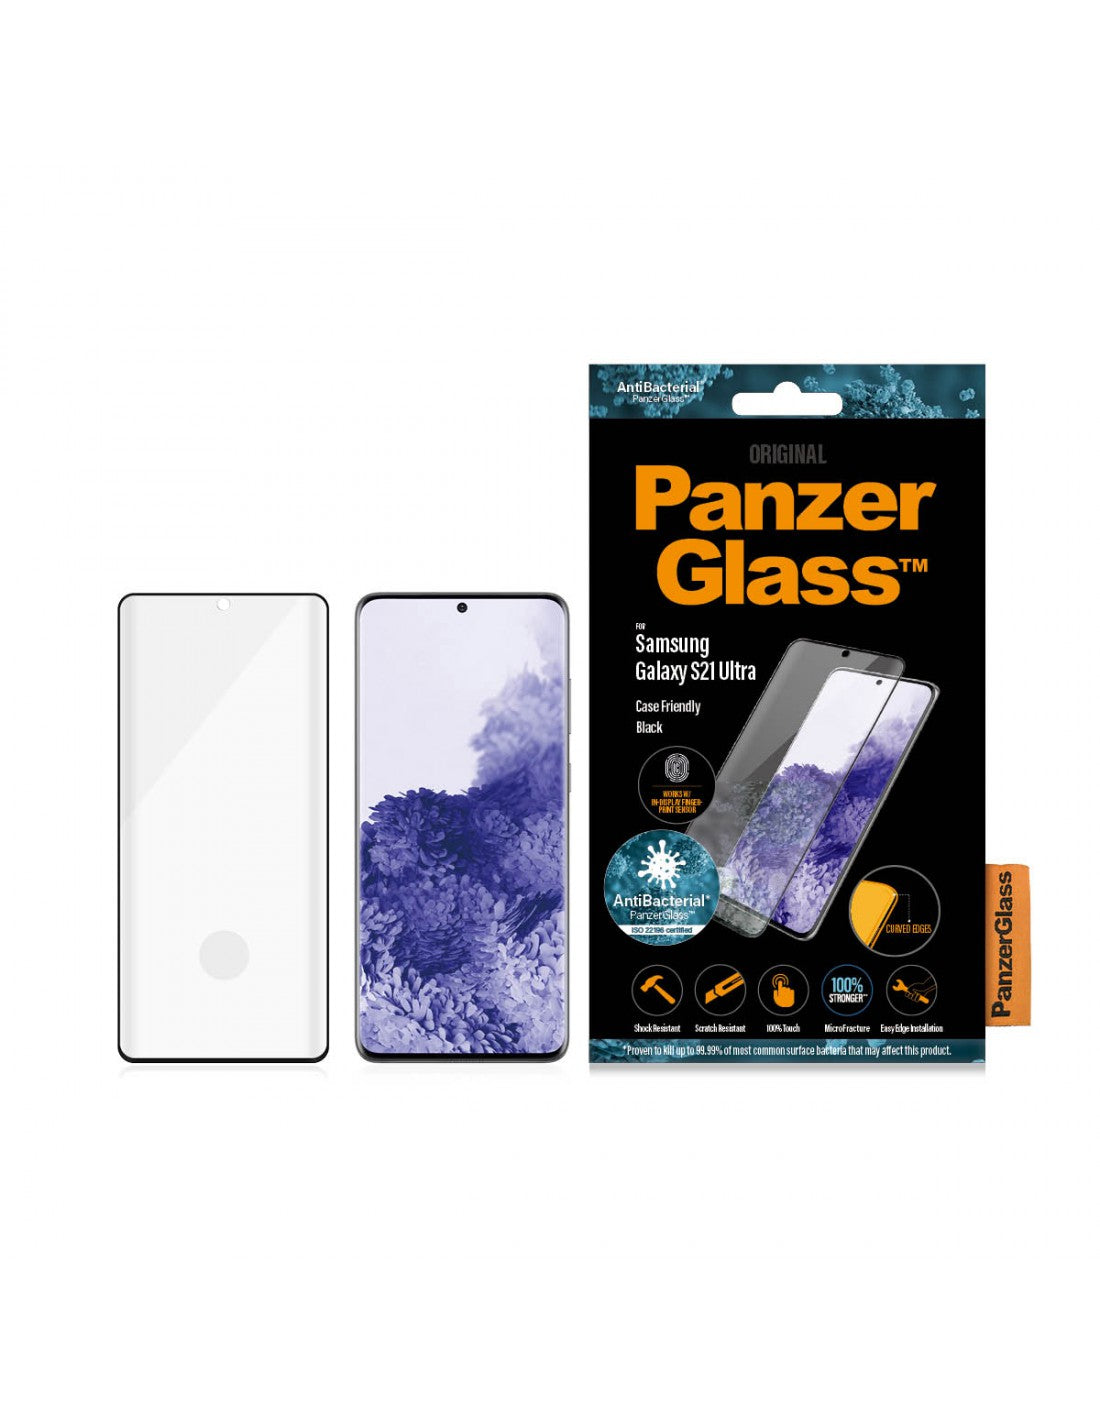 Panzer Glass Screen Protector For Samsung Galaxy S21 Ultra (CASE FRIENDLY)